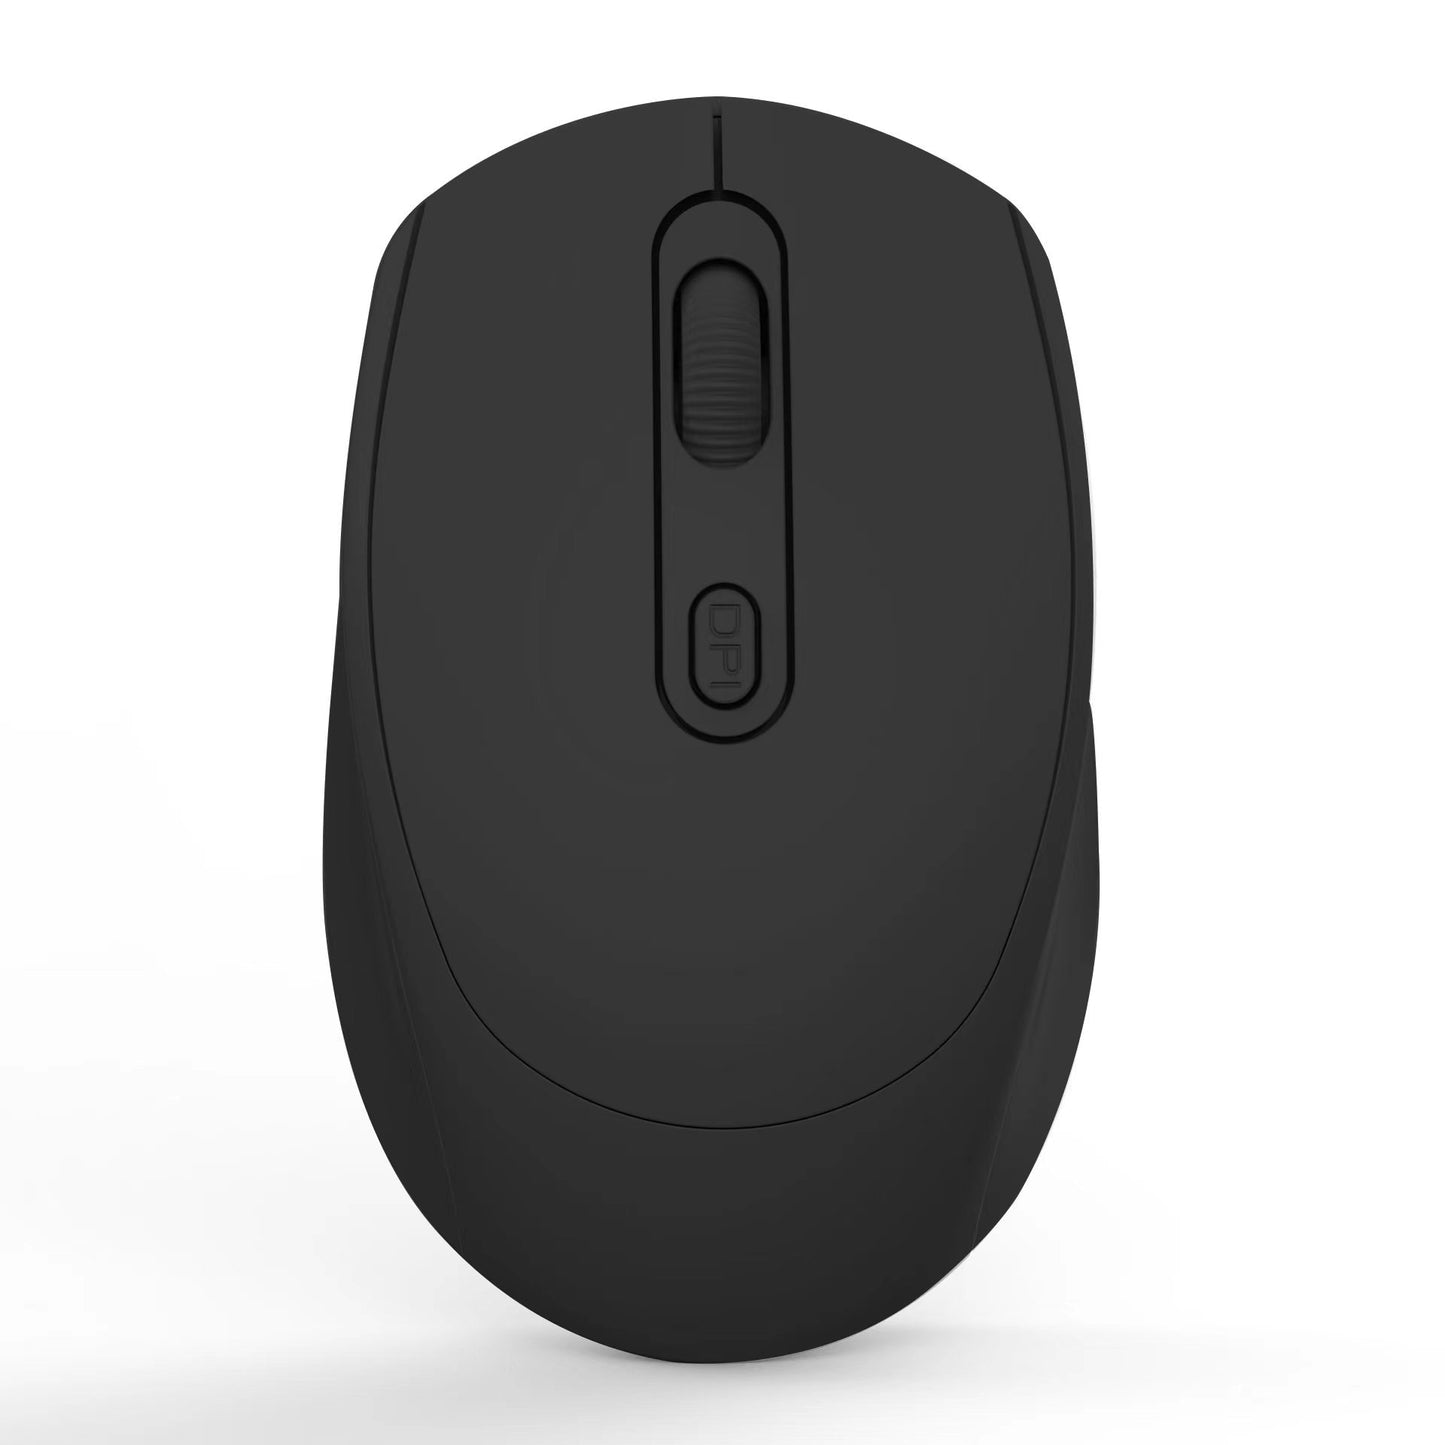 Rechargeable Wireless Bluetooth Mouse Mute USB Ergonomic Gamer Mouse For Computer Laptop Macbook